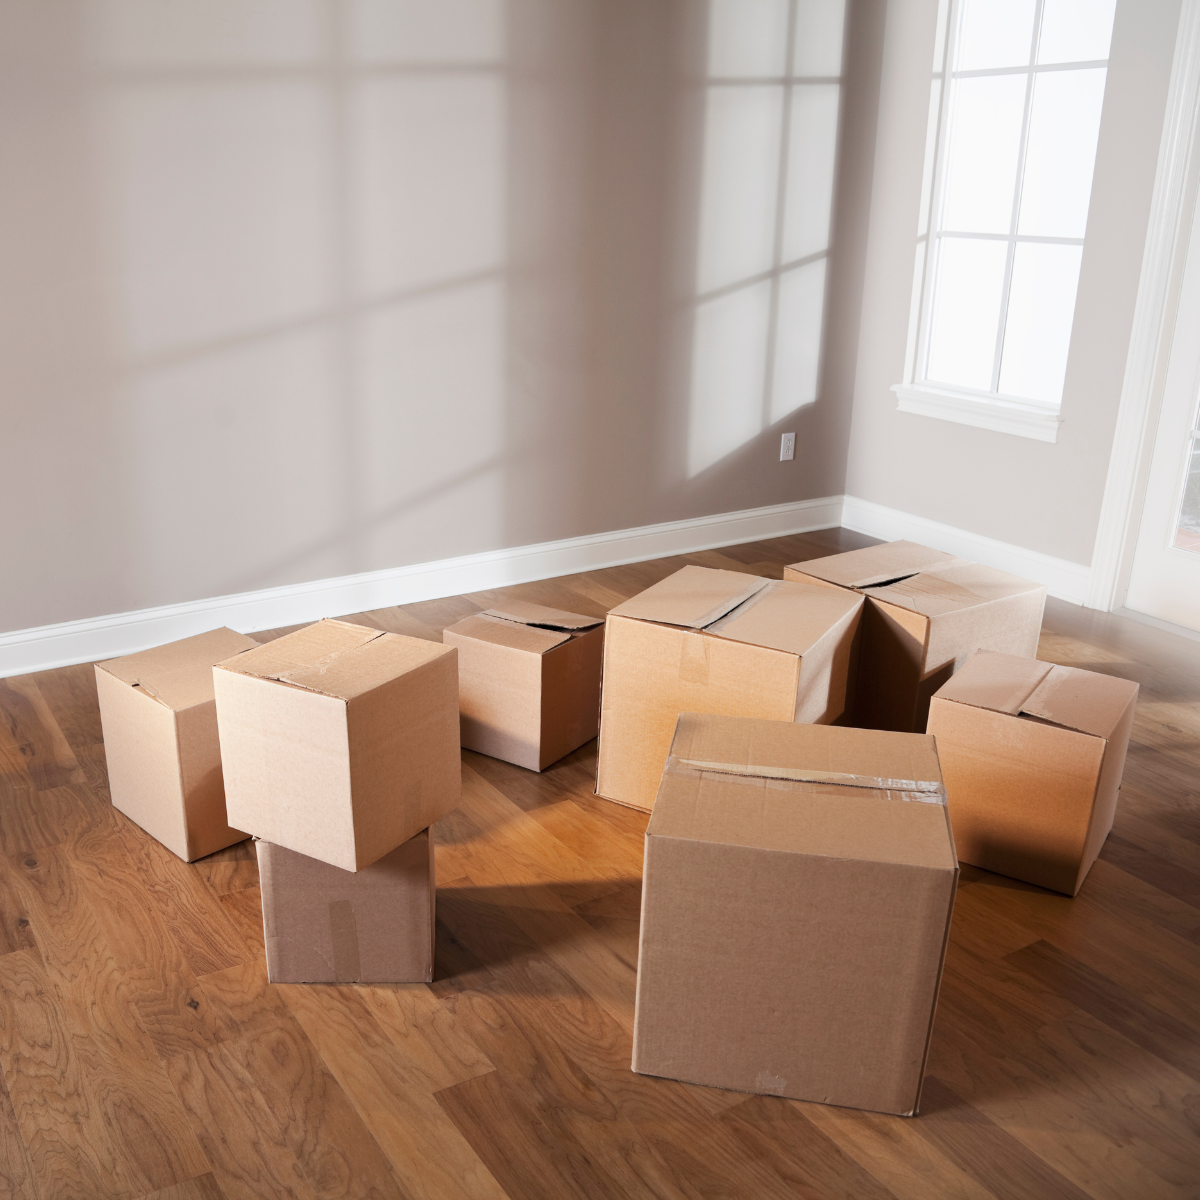 Should You Completely Decommission Your Office Space or Just Downsize?